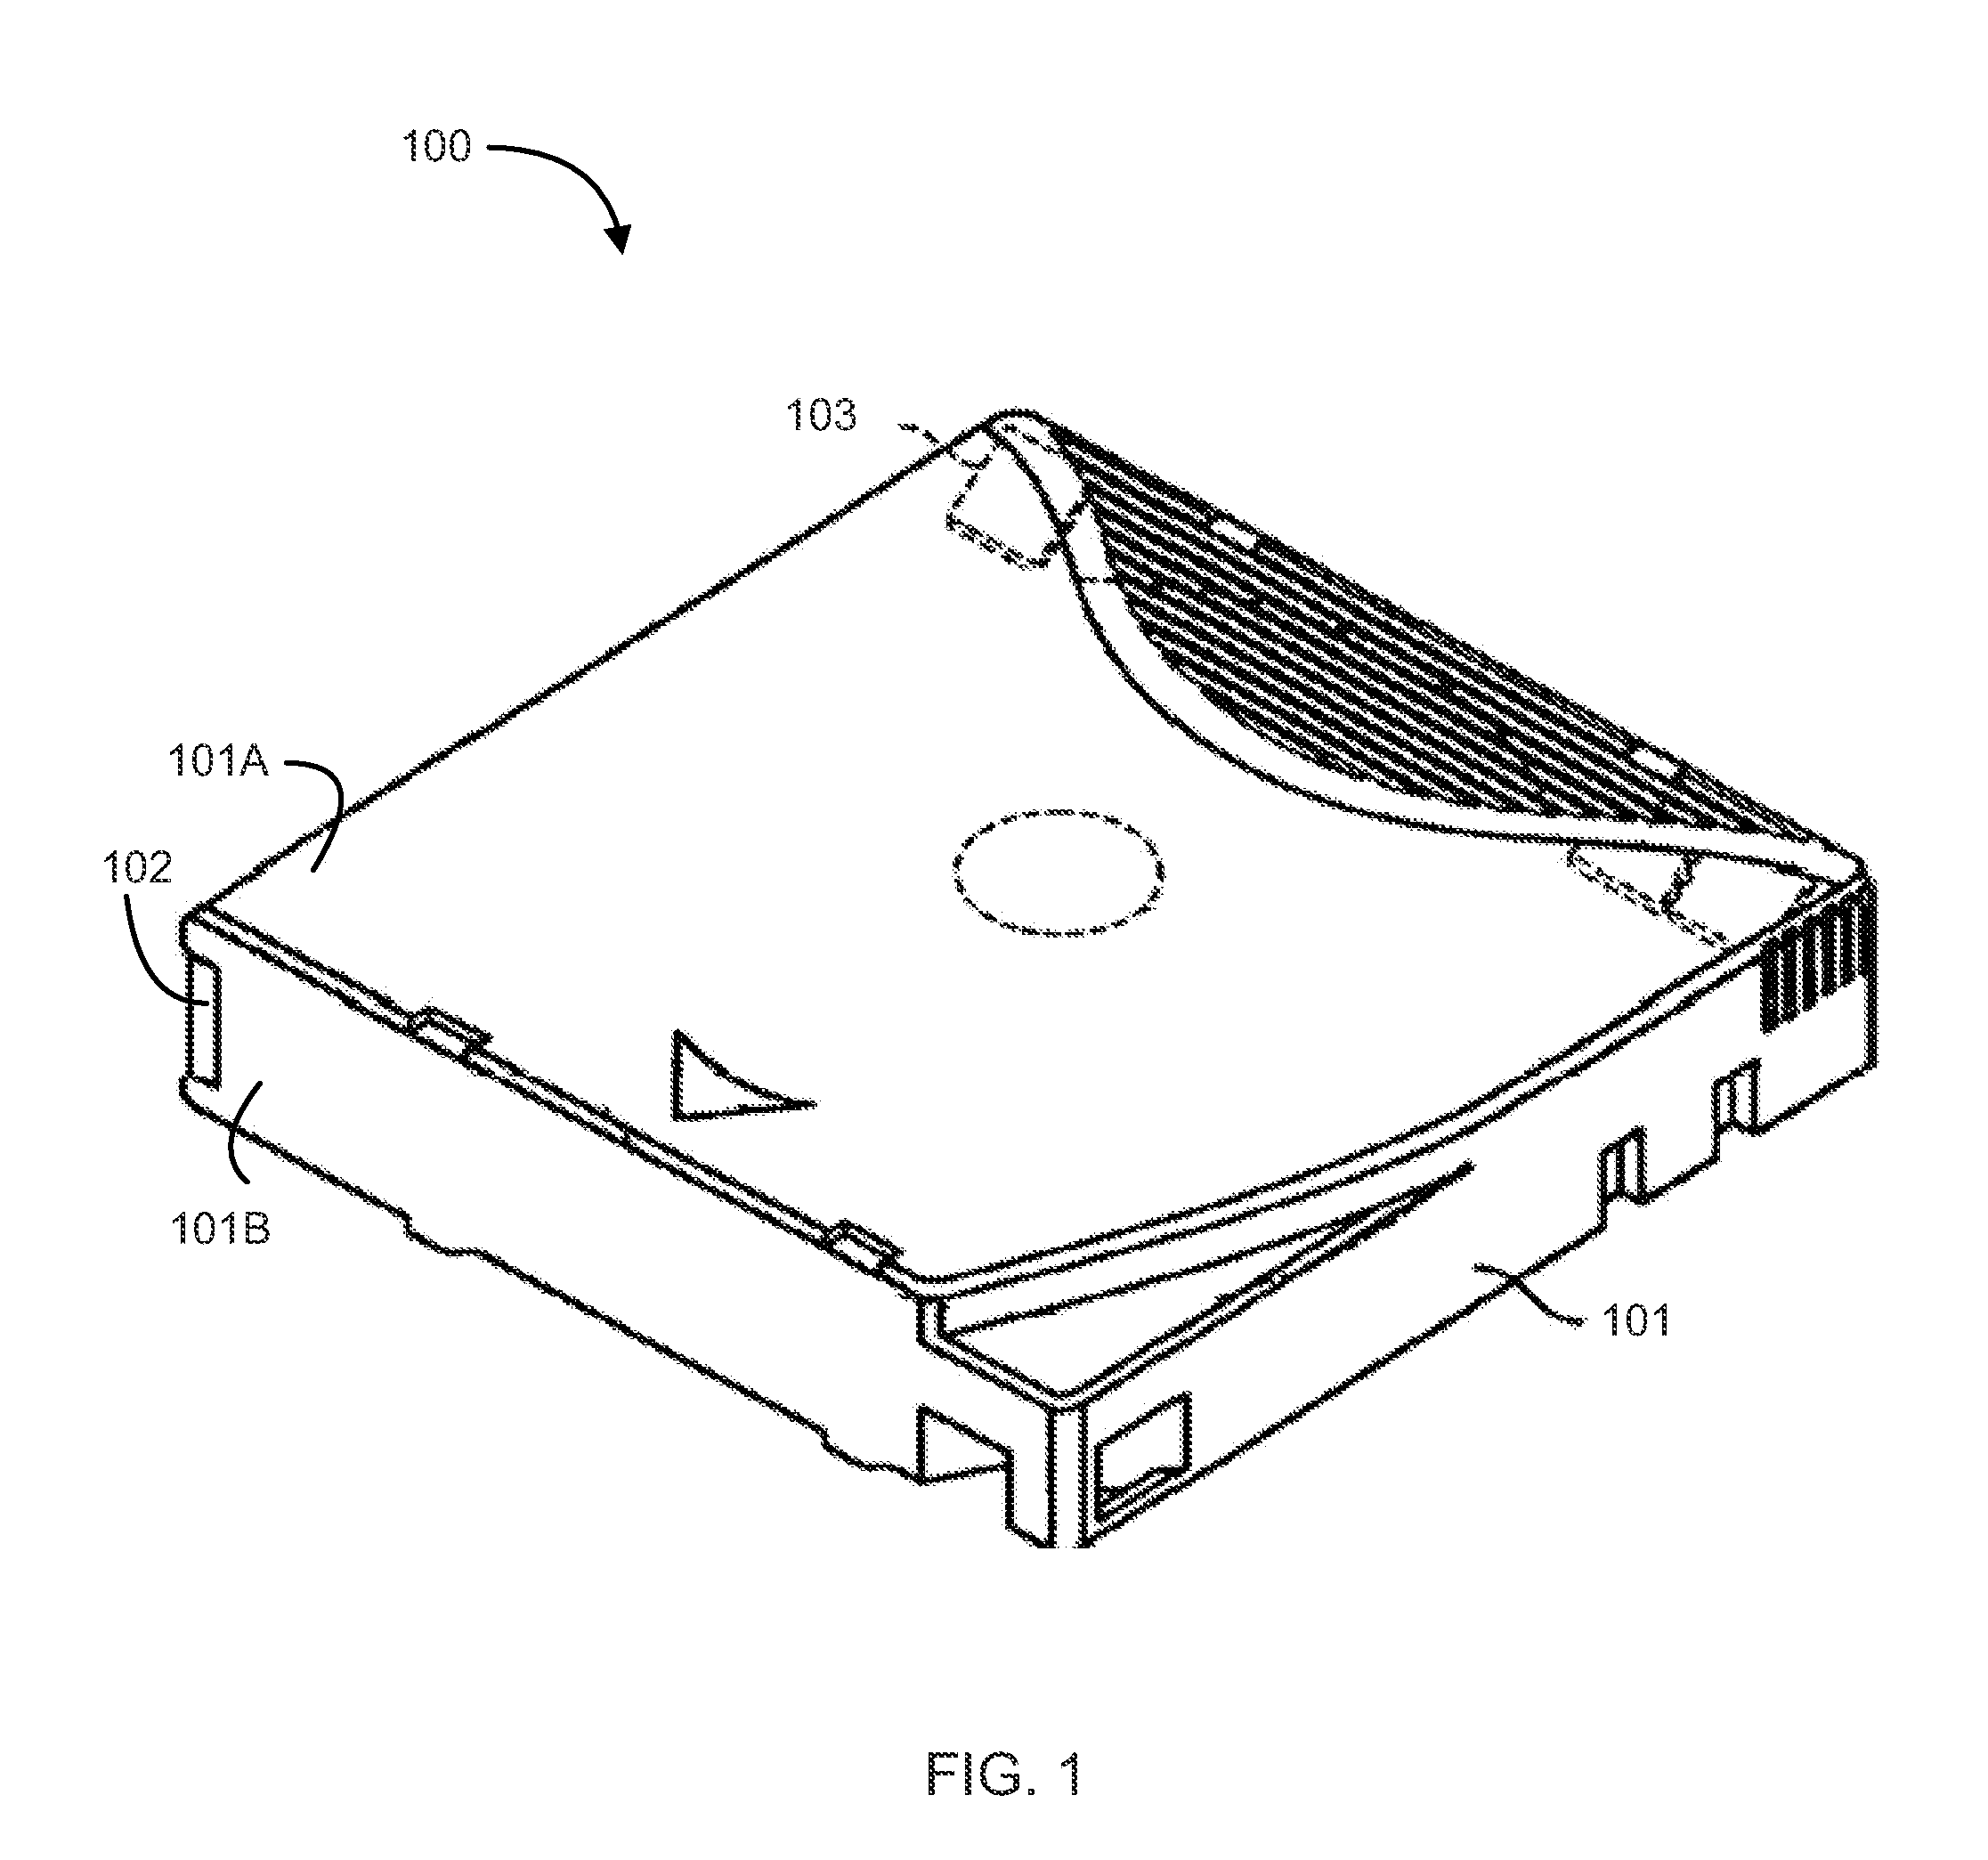 Cartridge for storing biosample plates and use in automated data storage systems